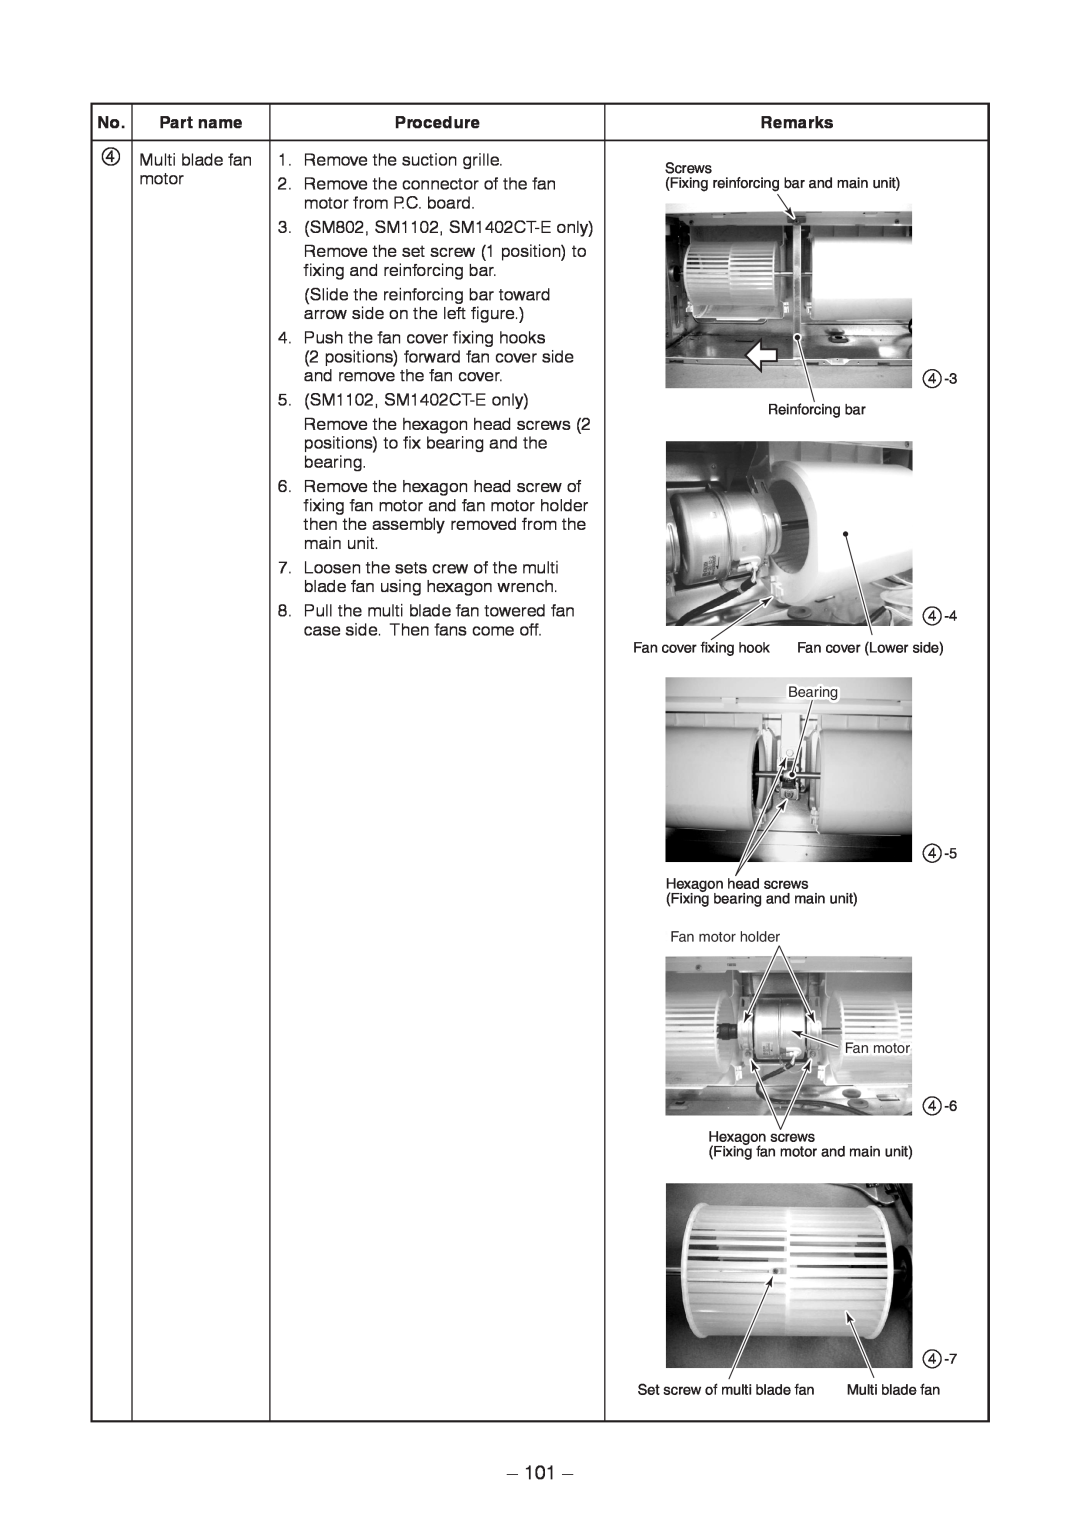 Toshiba CONCEALED DUCK TYPE, CEILING TYPE service manual 101, Part name, Procedure, Remarks 